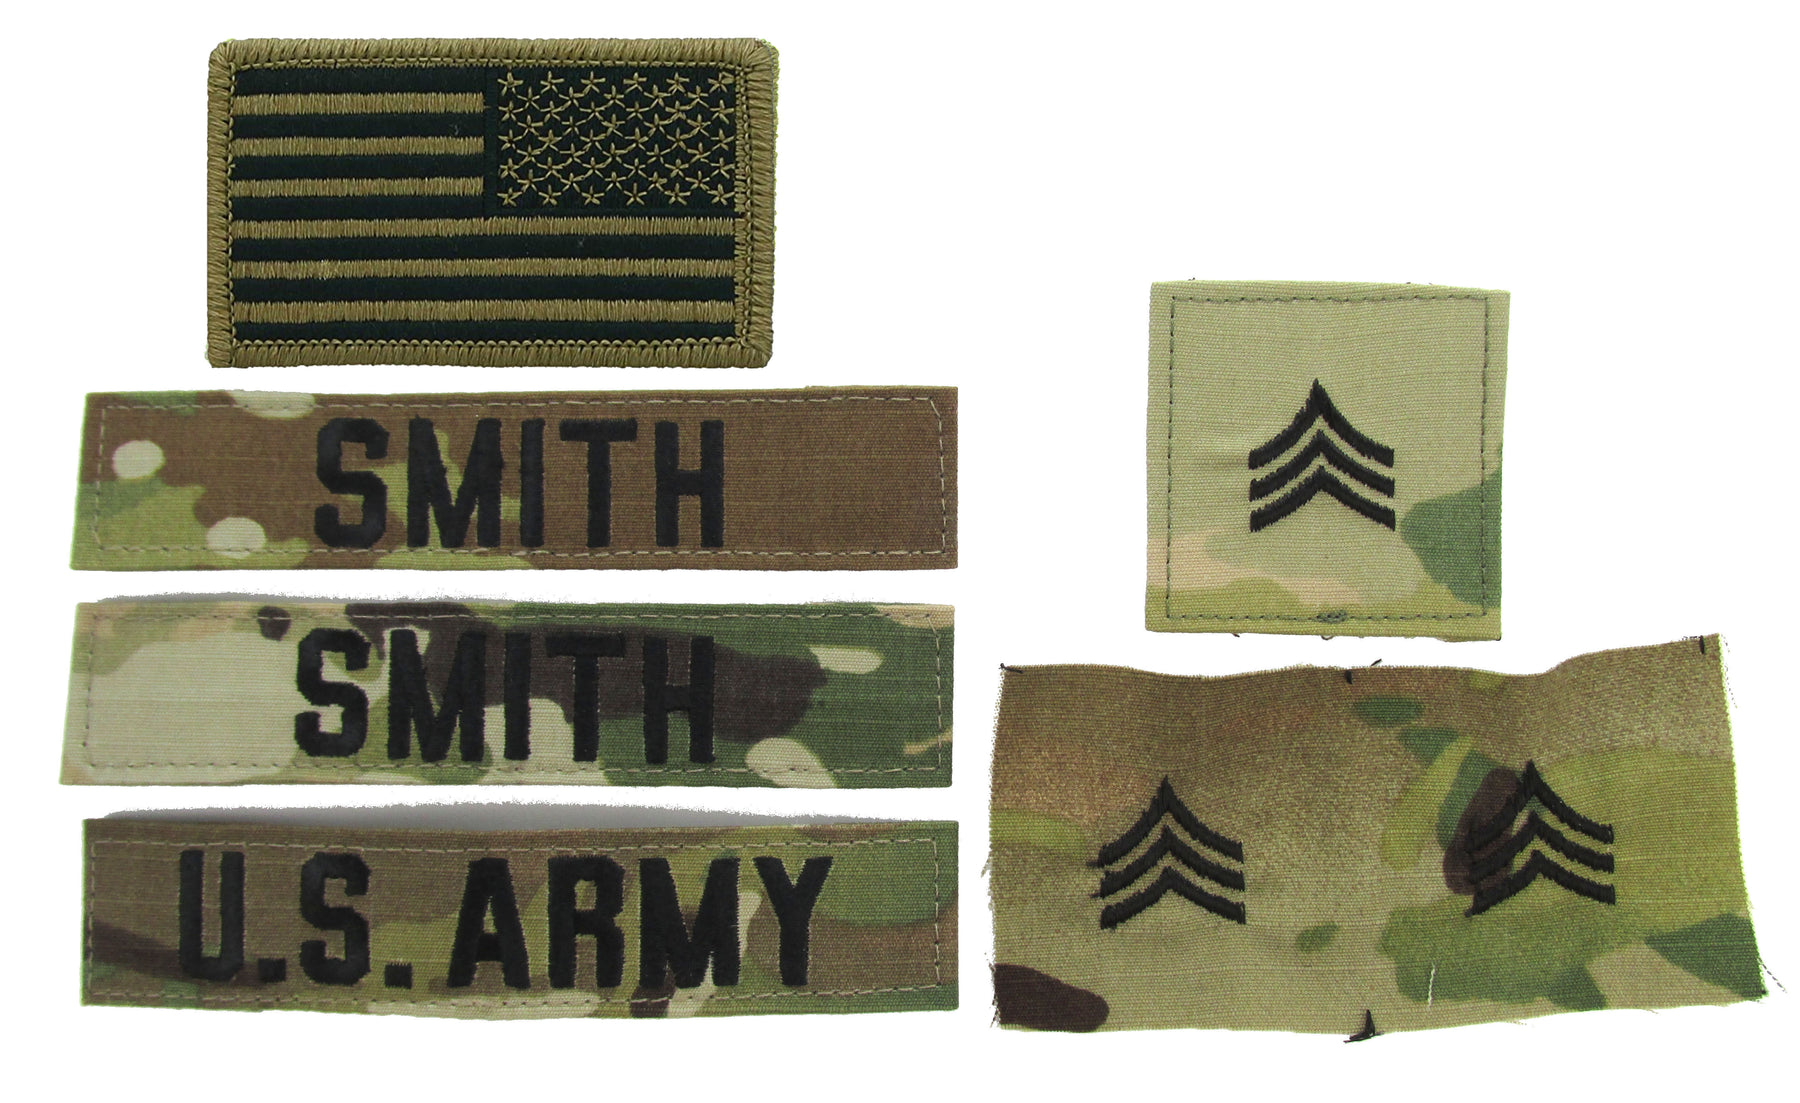 OCP Uniform Name Tapes for Army ACU - Set of 3 Last Name